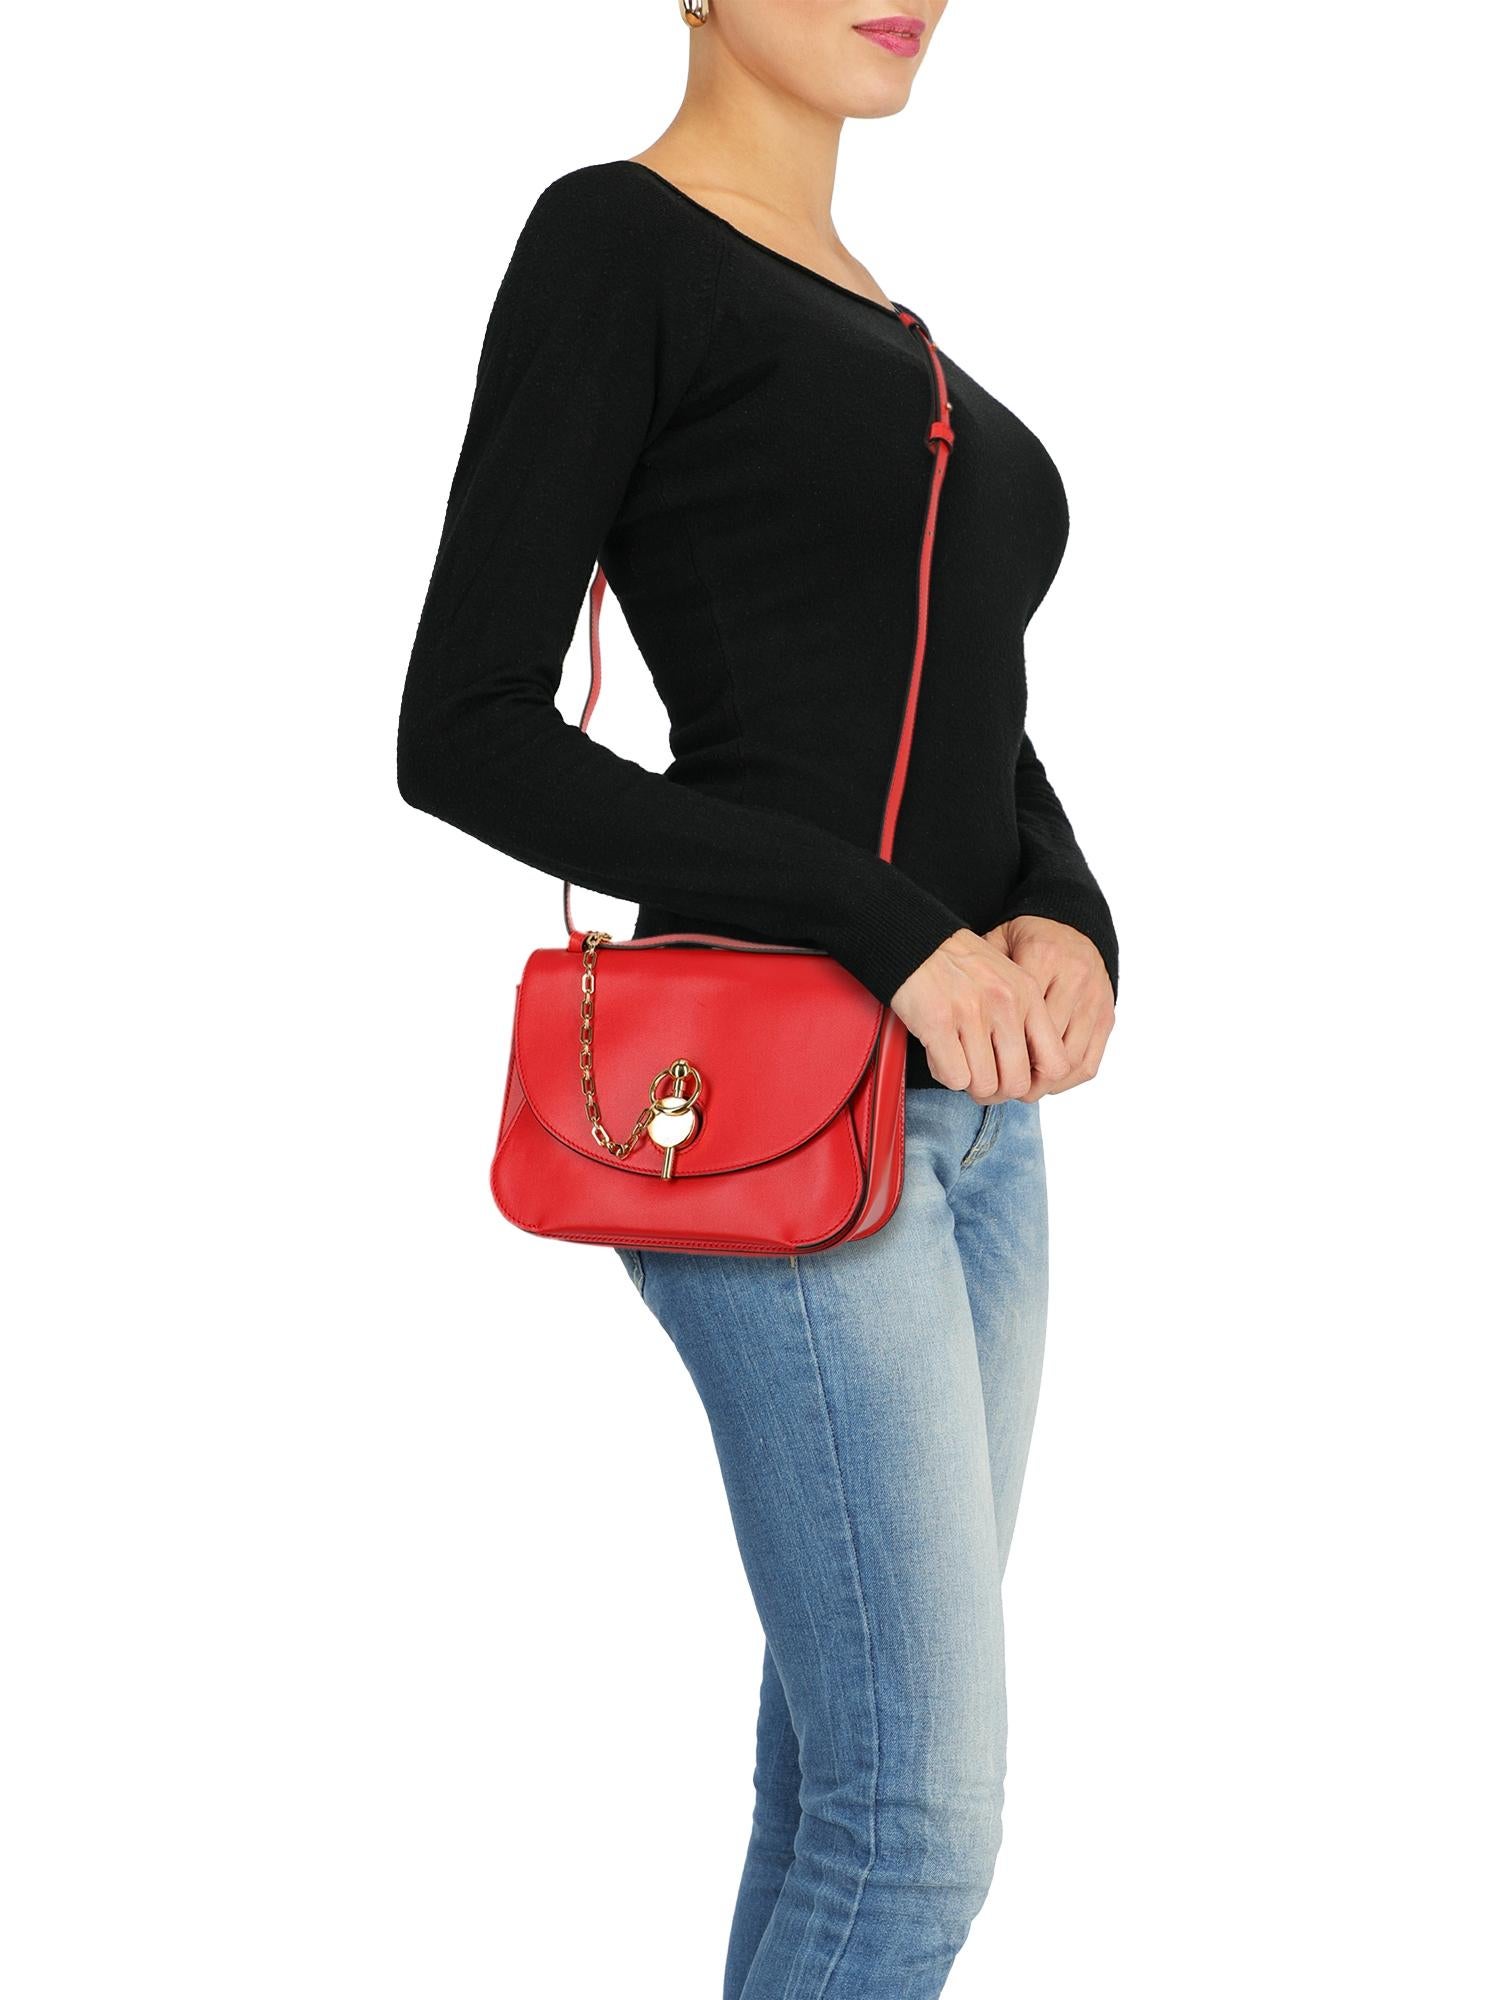 Cross body bag, leather, solid color, front logo, clasp closure, gold-tone hardware, internal slip pocket, internal pocket

Includes:
- Dust bag

Product Condition: Excellent
Lining: negligible stains. External Leather: slightly visible